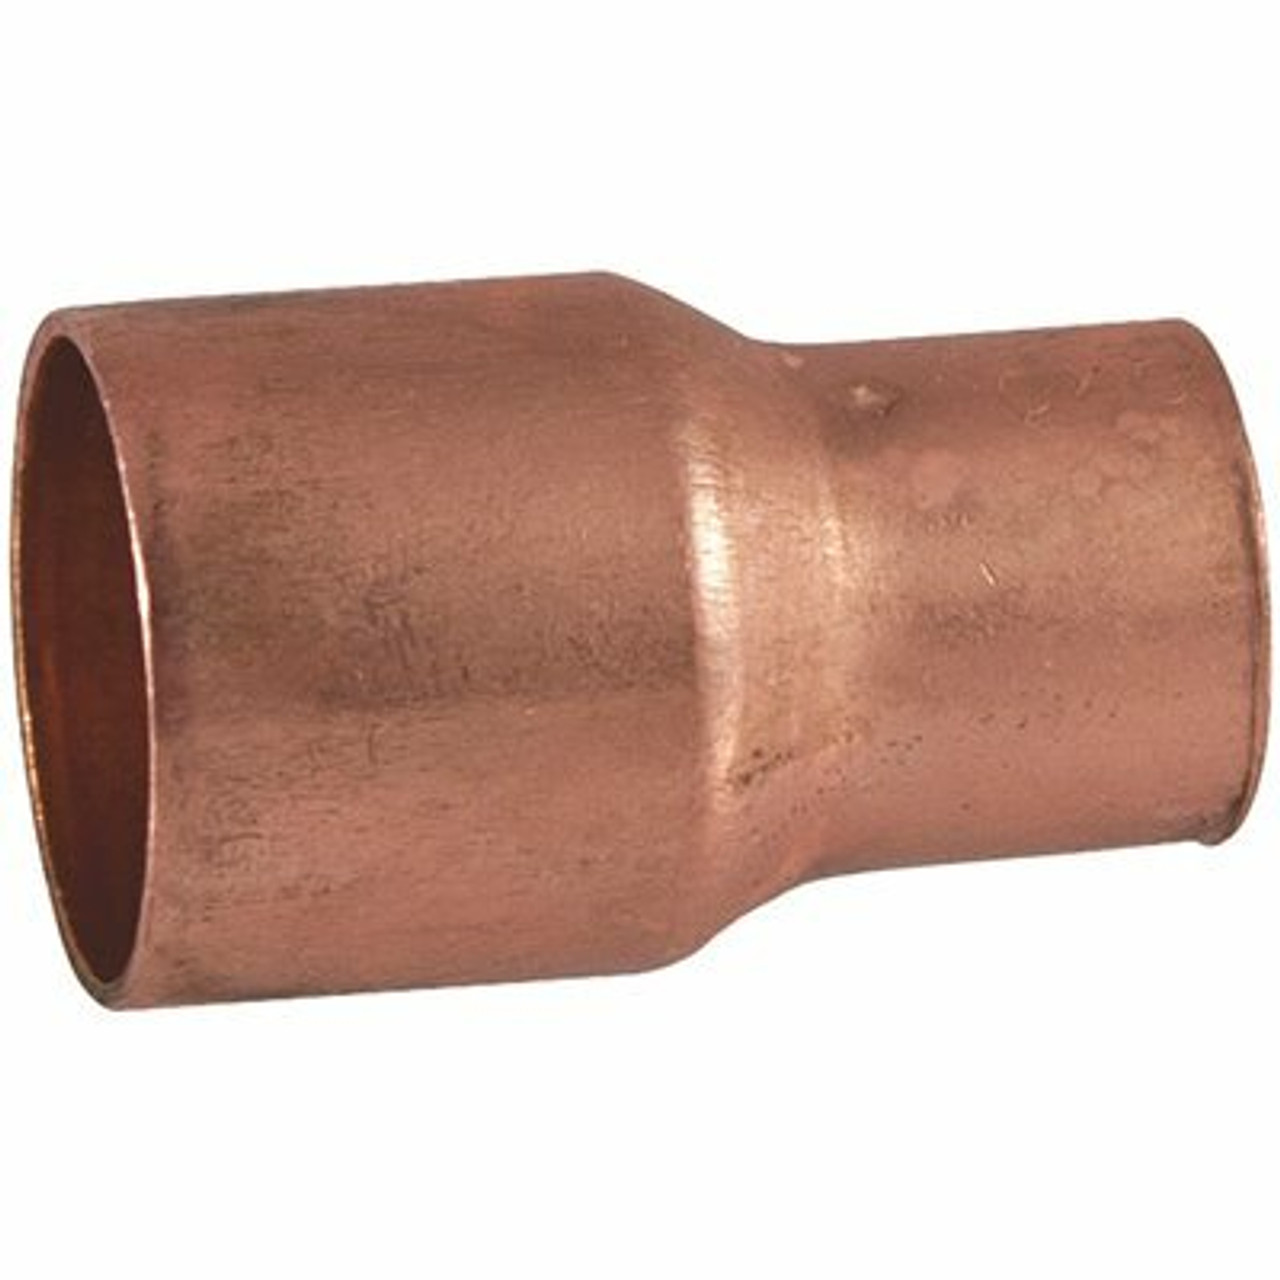 Everbilt 1-1/4 In. X 1 In. Copper Pressure Cup X Cup Reducing Coupling Fitting With Stop